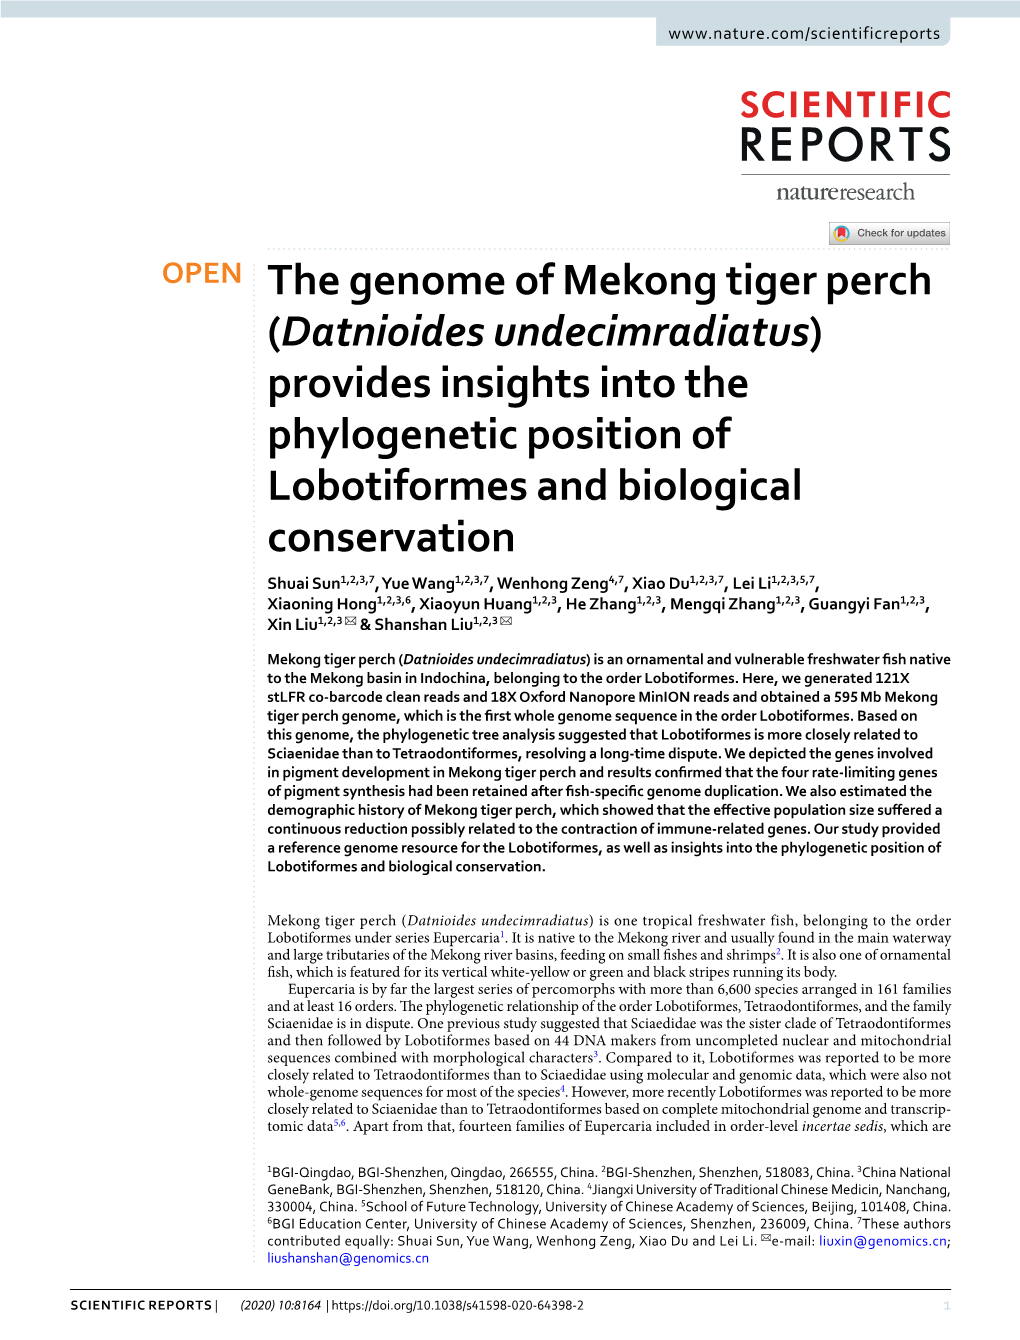 The Genome of Mekong Tiger Perch